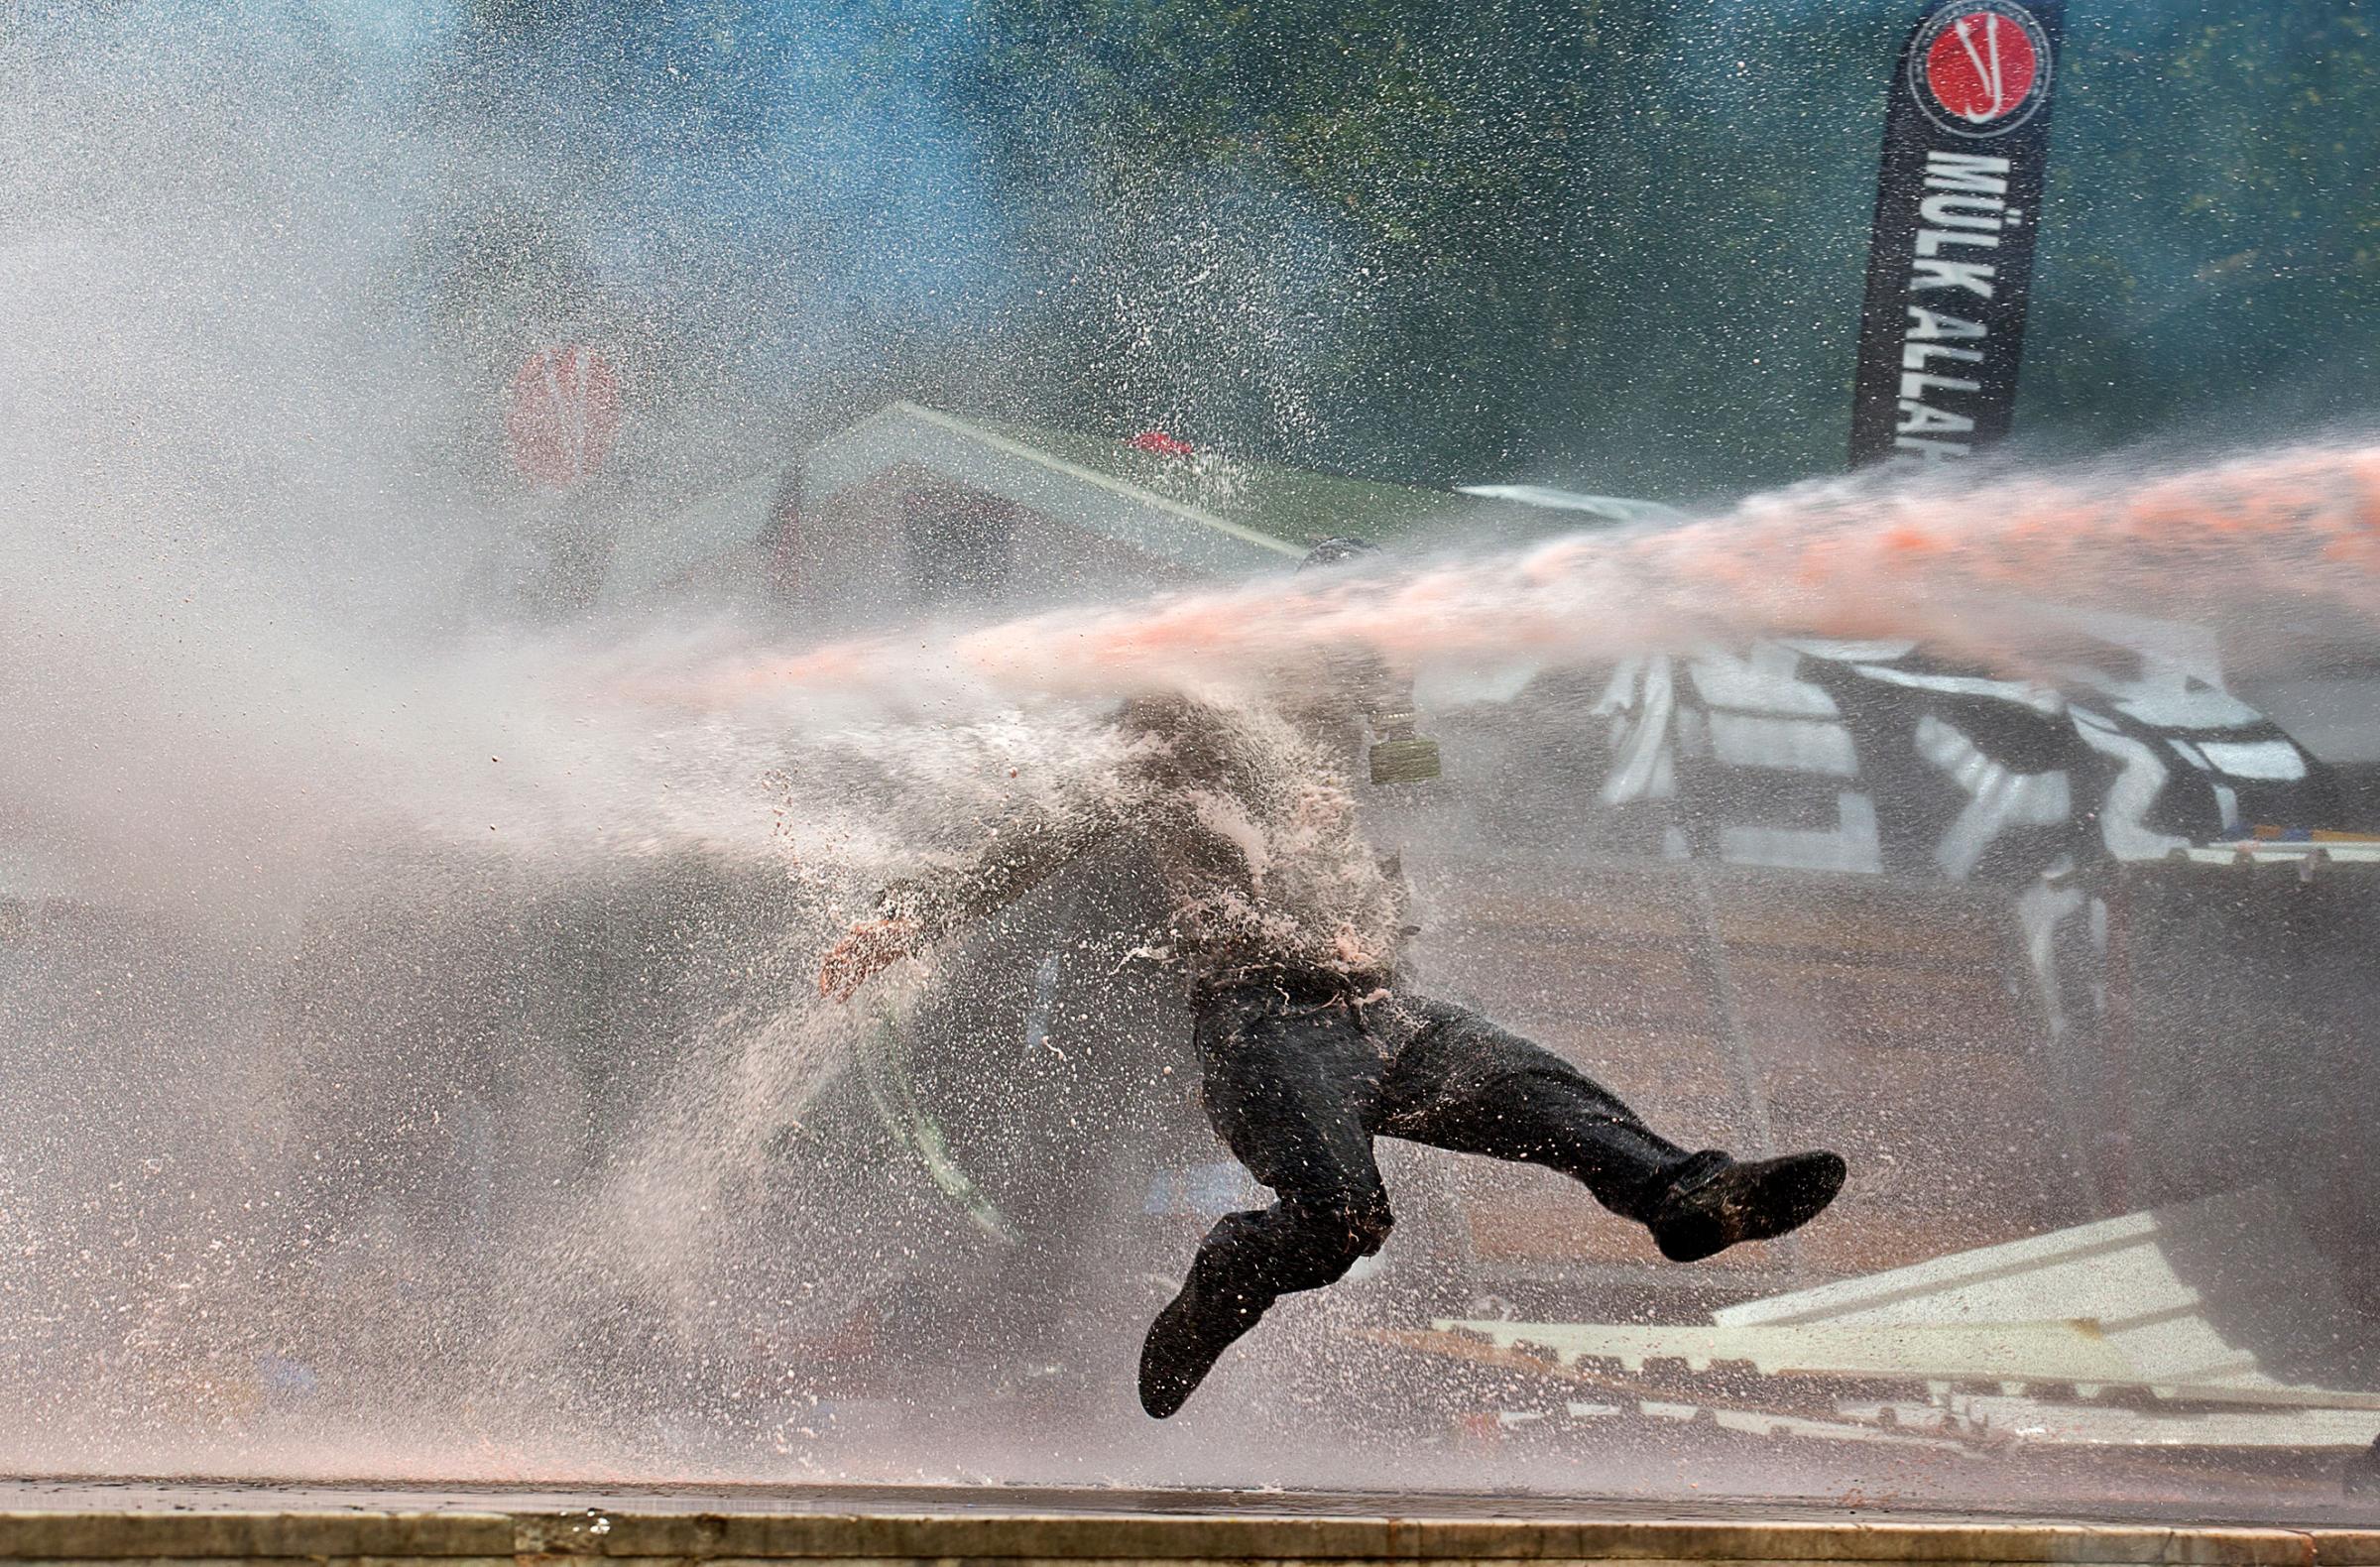 A protester is hit by a water cannon during clashes in Taksim Square, Istanbul on June 11, 2013.